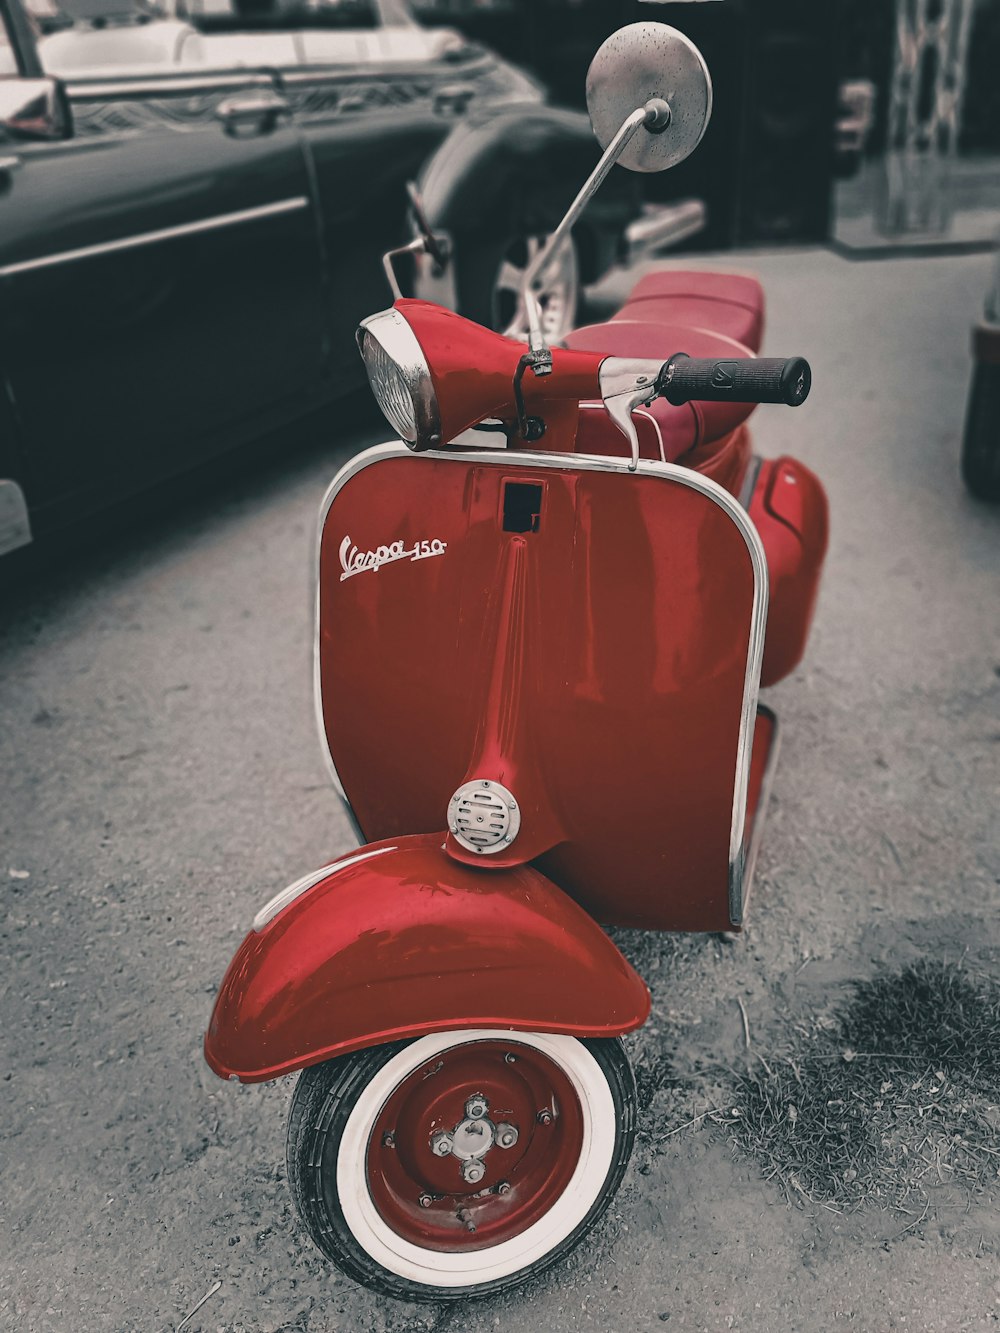 red and white motor scooter on gray asphalt road during daytime